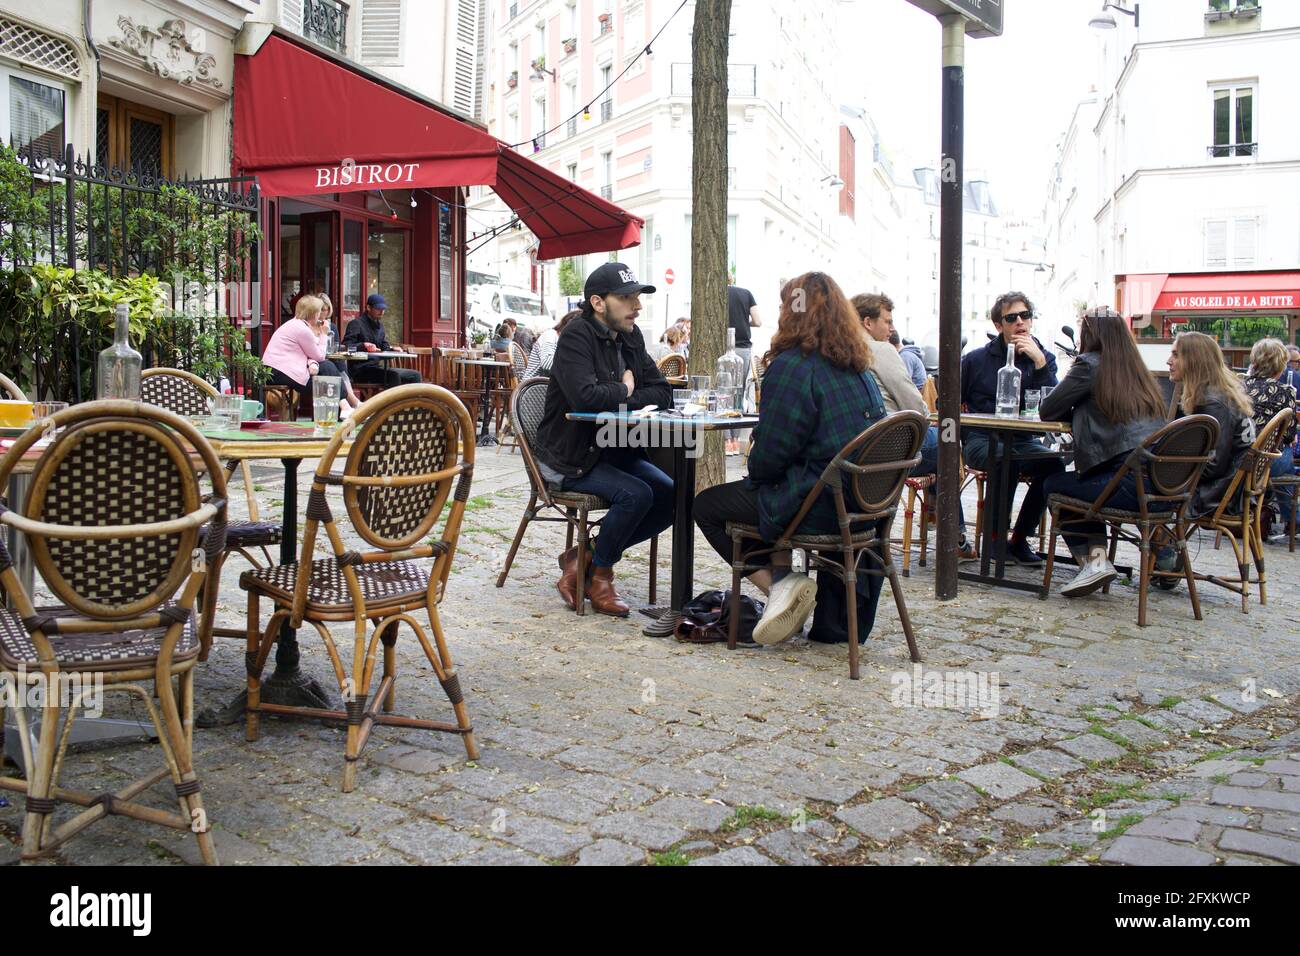 Parisians enjoy a drink on a Bistrot terrace, one of many terraces now open to the public after Covid-19 lockdown restrictions are eased -  Place Paul Albert, 75018, Paris, France. May 2021. Stock Photo